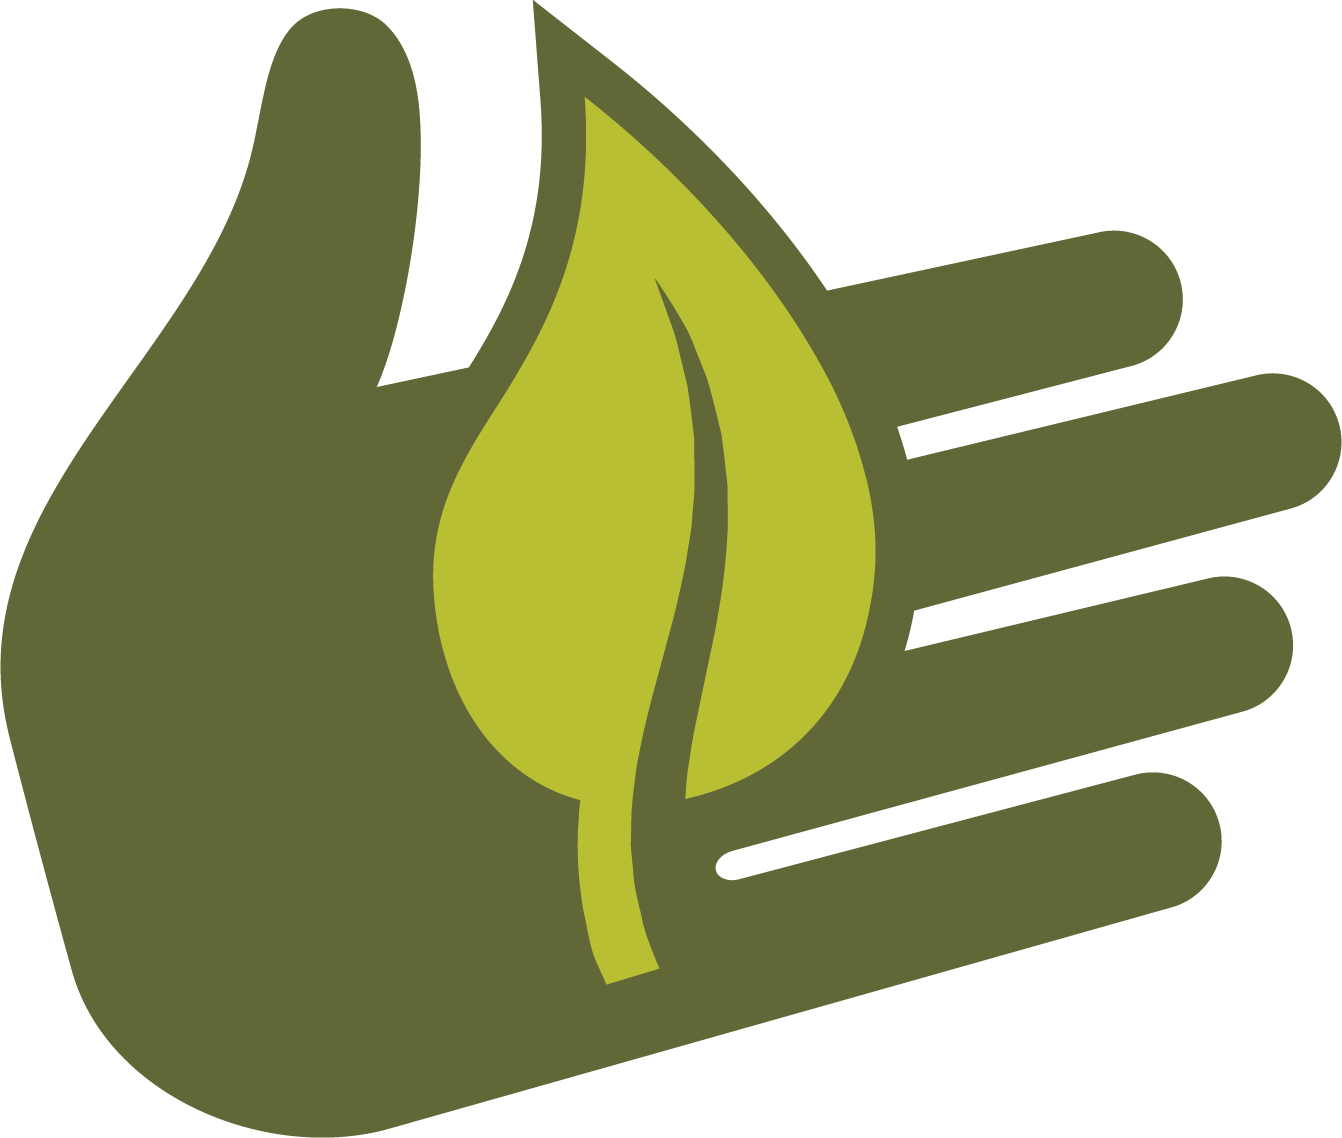 Silhouette of a hand holding a leaf